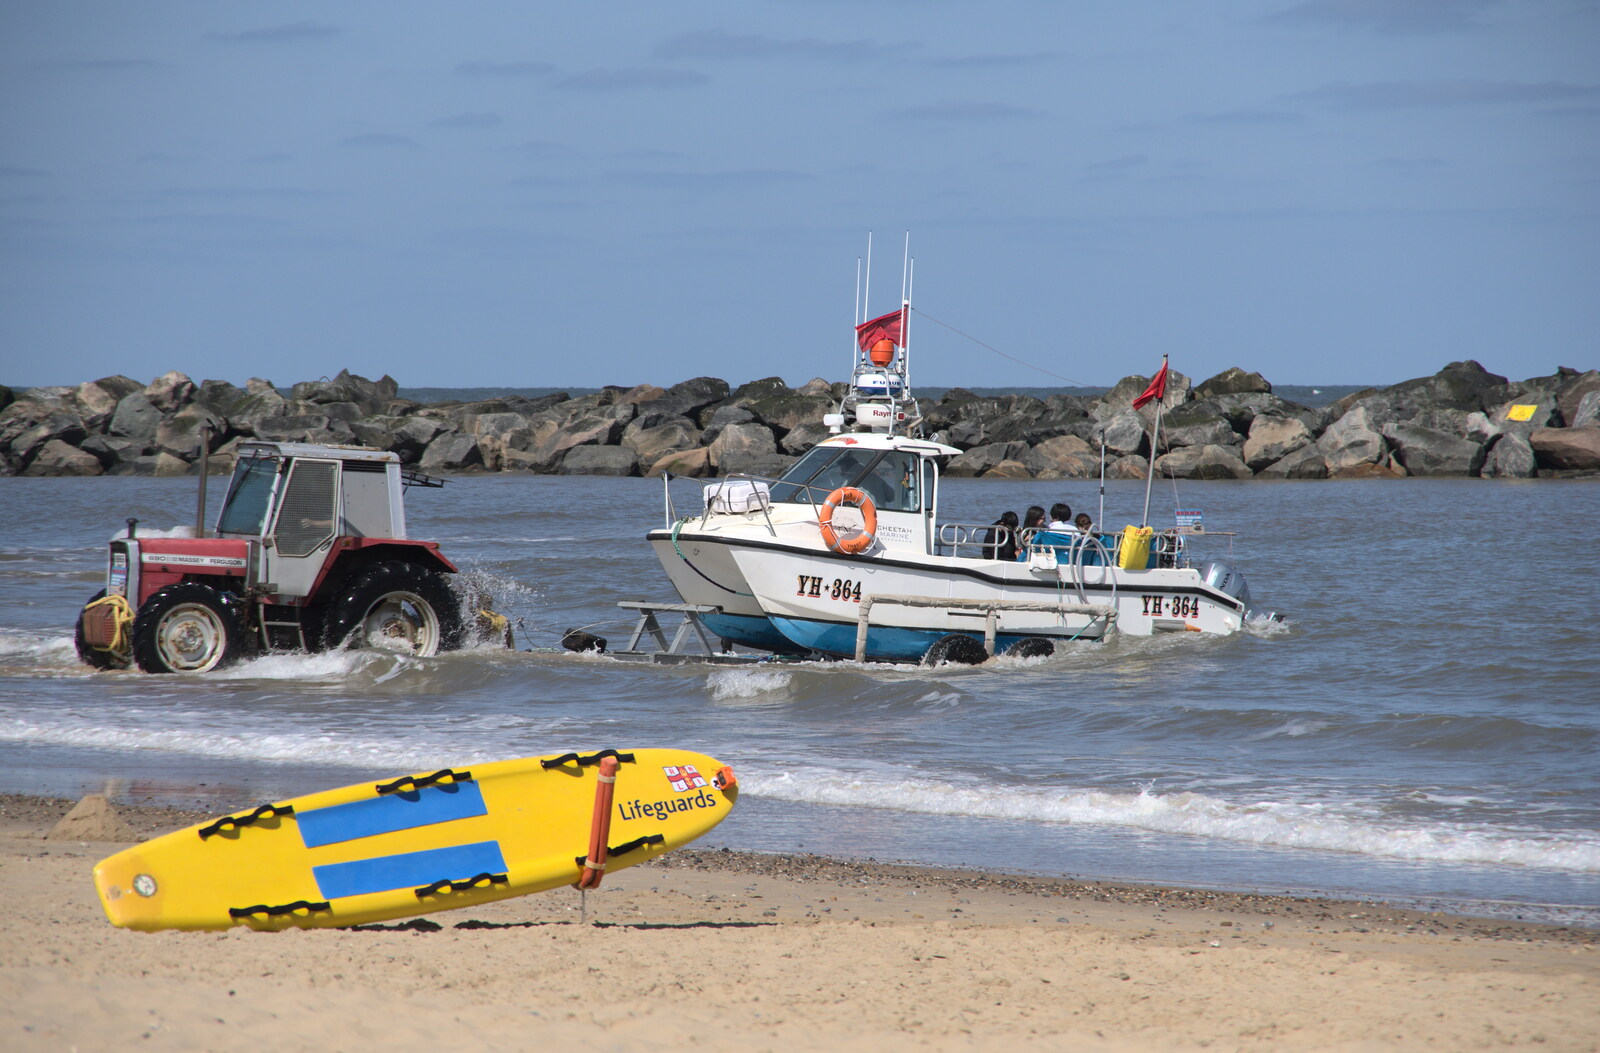 The tour boat puts out to sea from On the Beach at Sea Palling, Norfolk - 8th May 2022